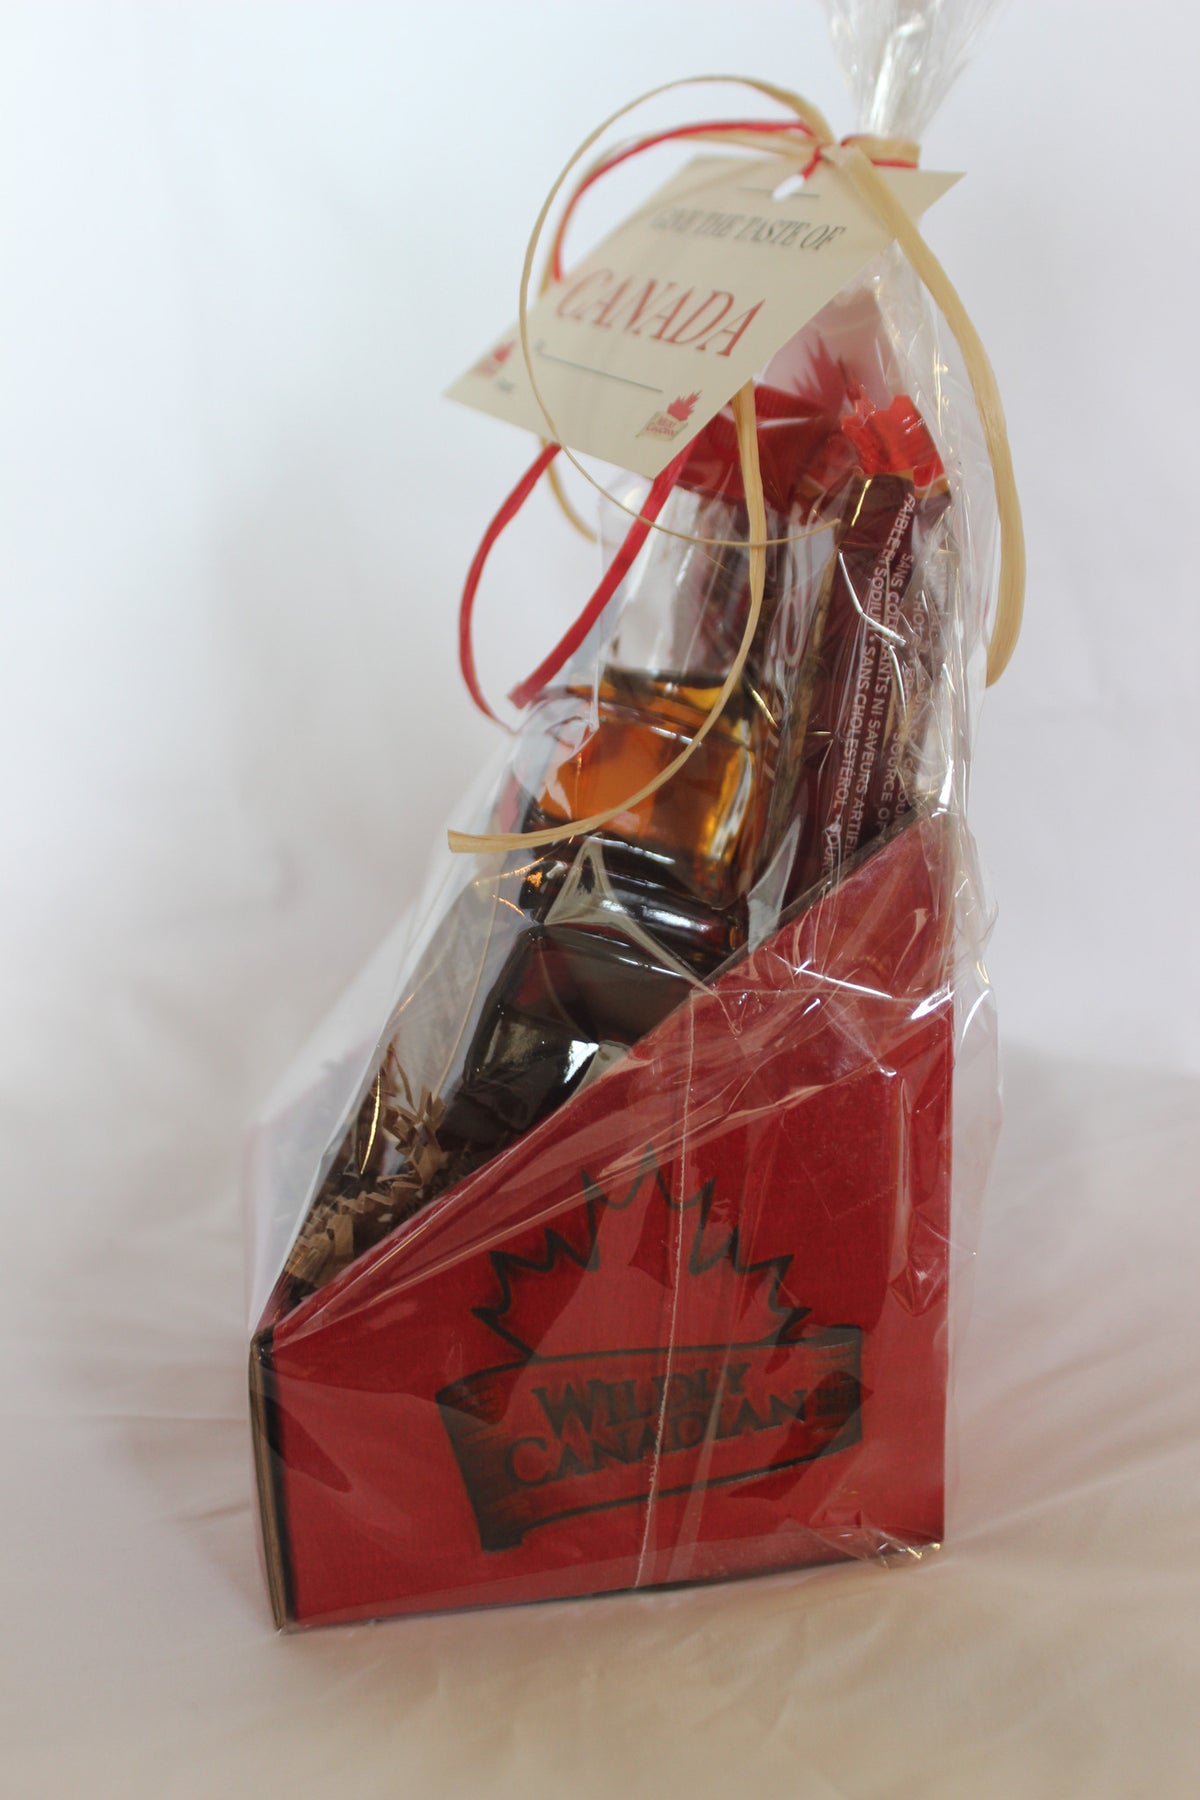 Taste of Canada Gift Package (small) - The Canadian Wild Rice Mercantile Ltd.